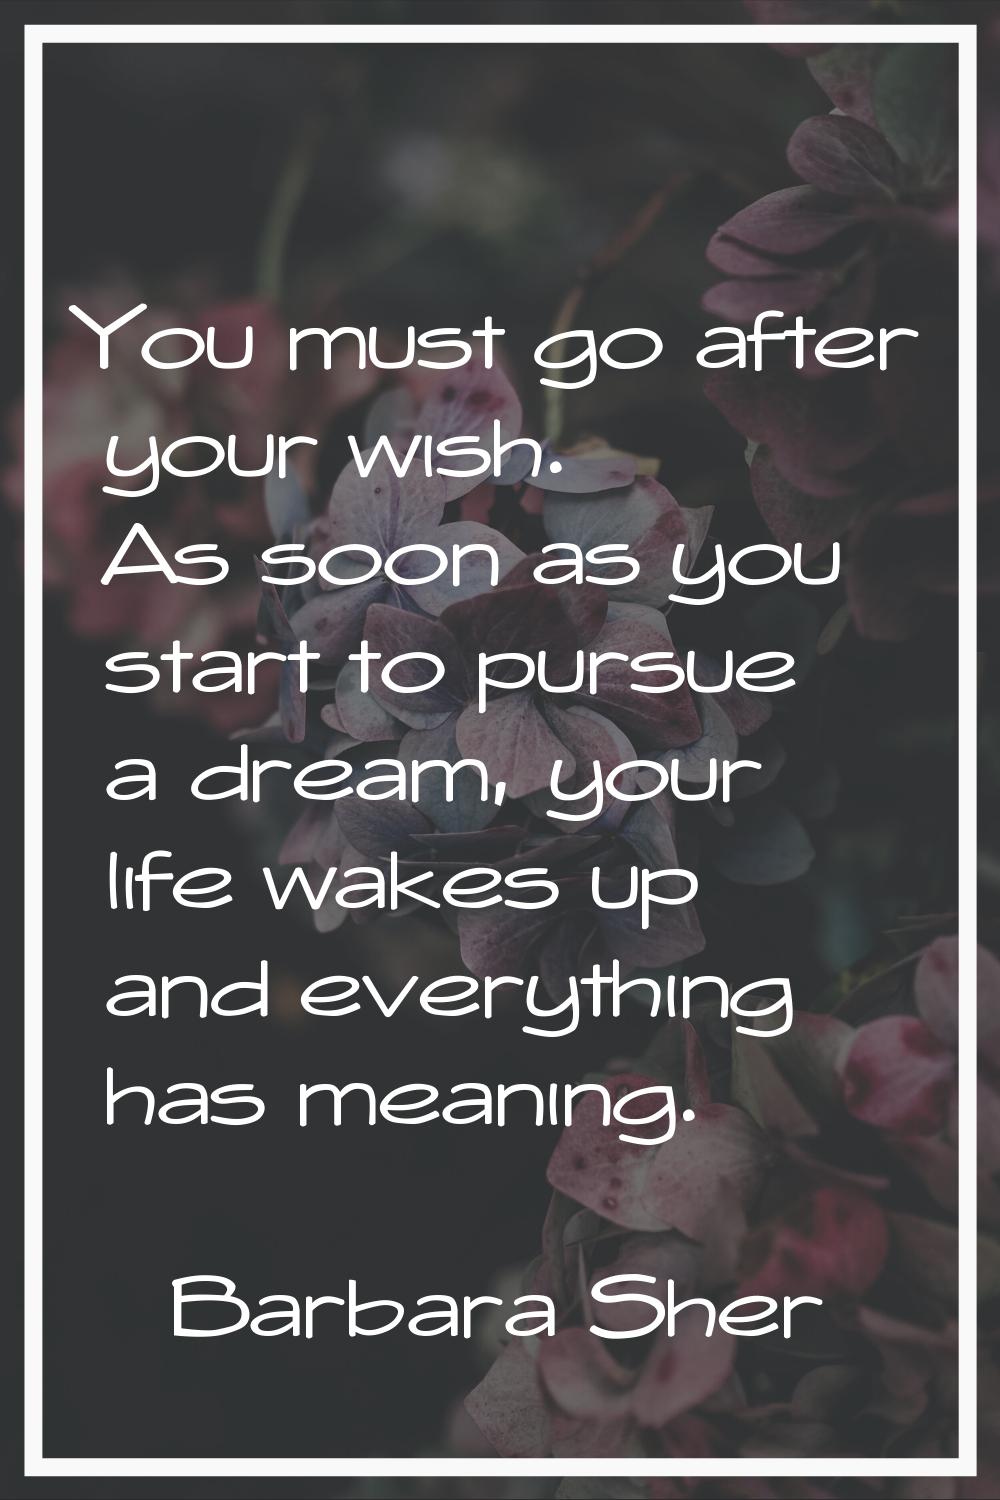 You must go after your wish. As soon as you start to pursue a dream, your life wakes up and everyth